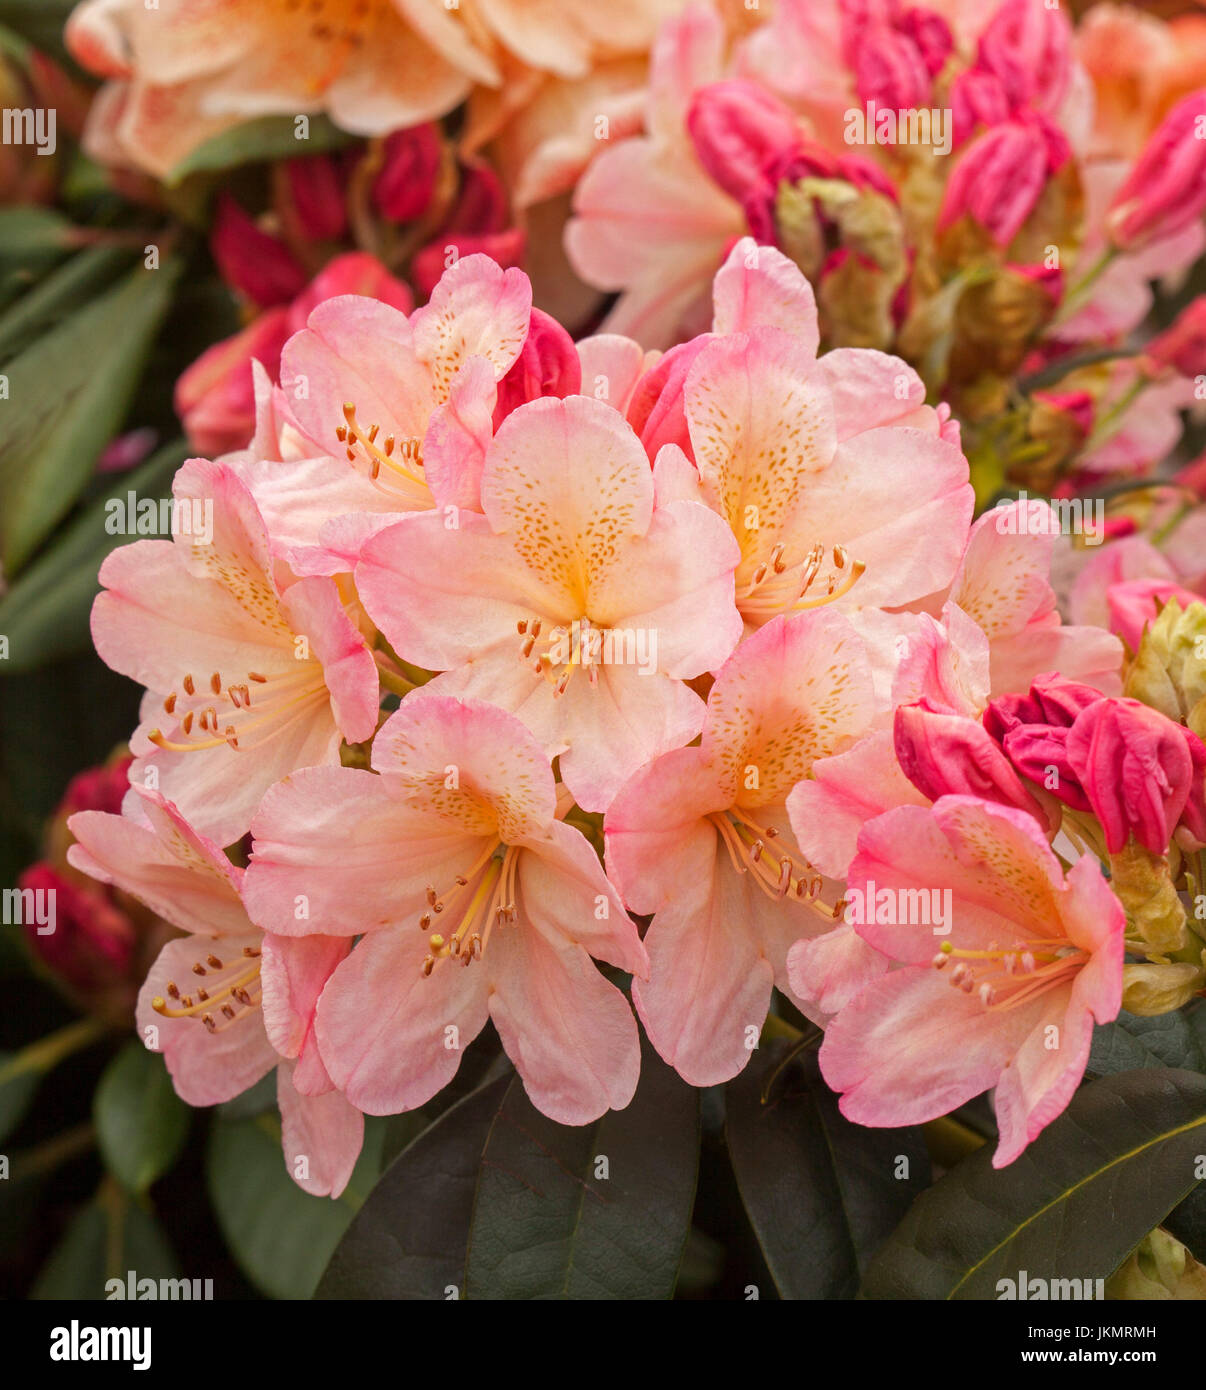 Cluster of stunning pale pink and apricot flowers and red buds of Rhododendron 'Golden Torch' Stock Photo